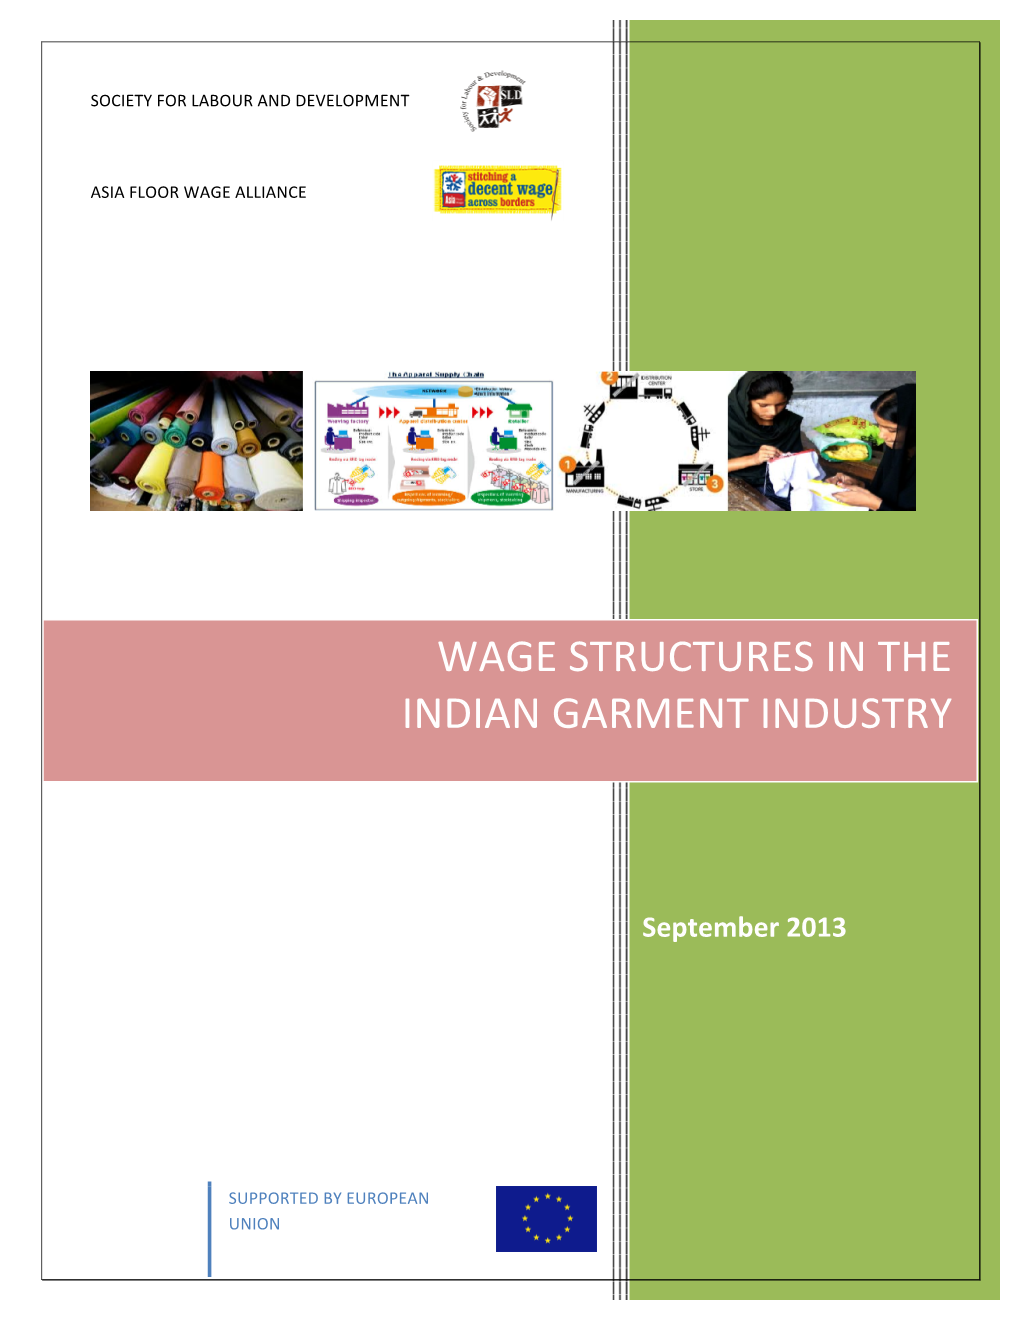 Wage Structures in the Indian Garment Industry